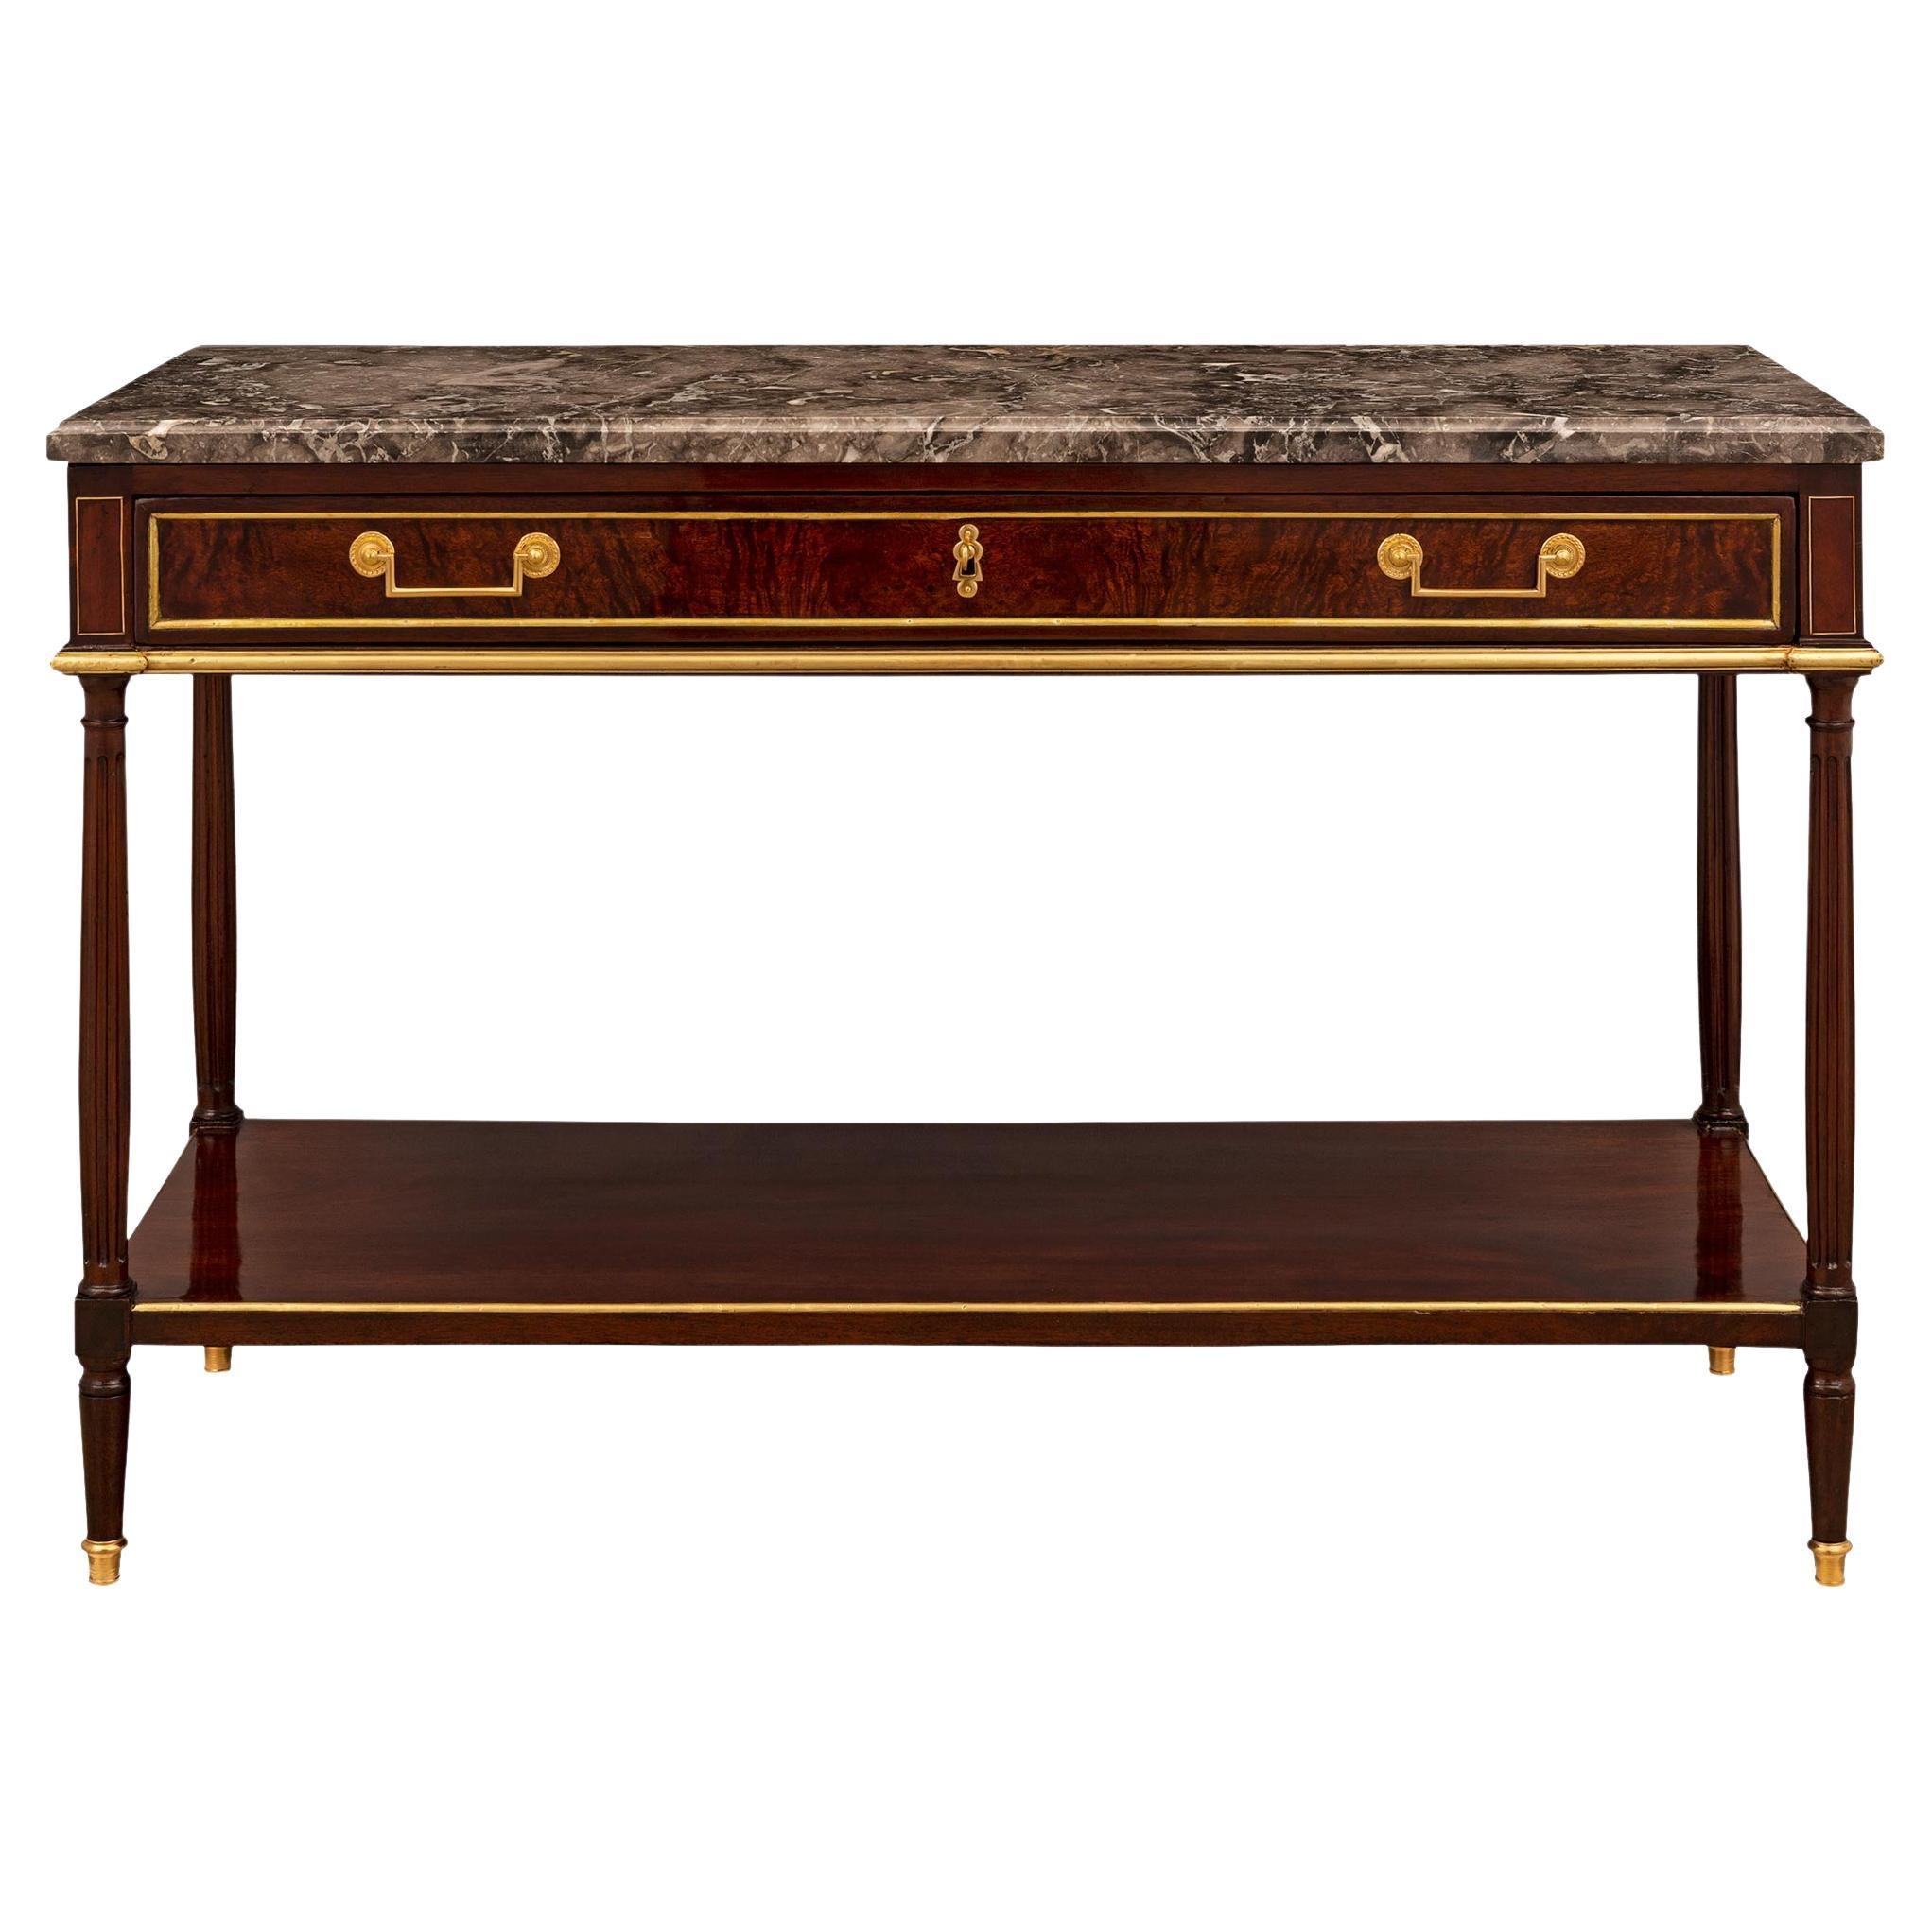 French 18th Century Louis XVI Period Mahogany, Ormolu and Marble Dessert Console For Sale